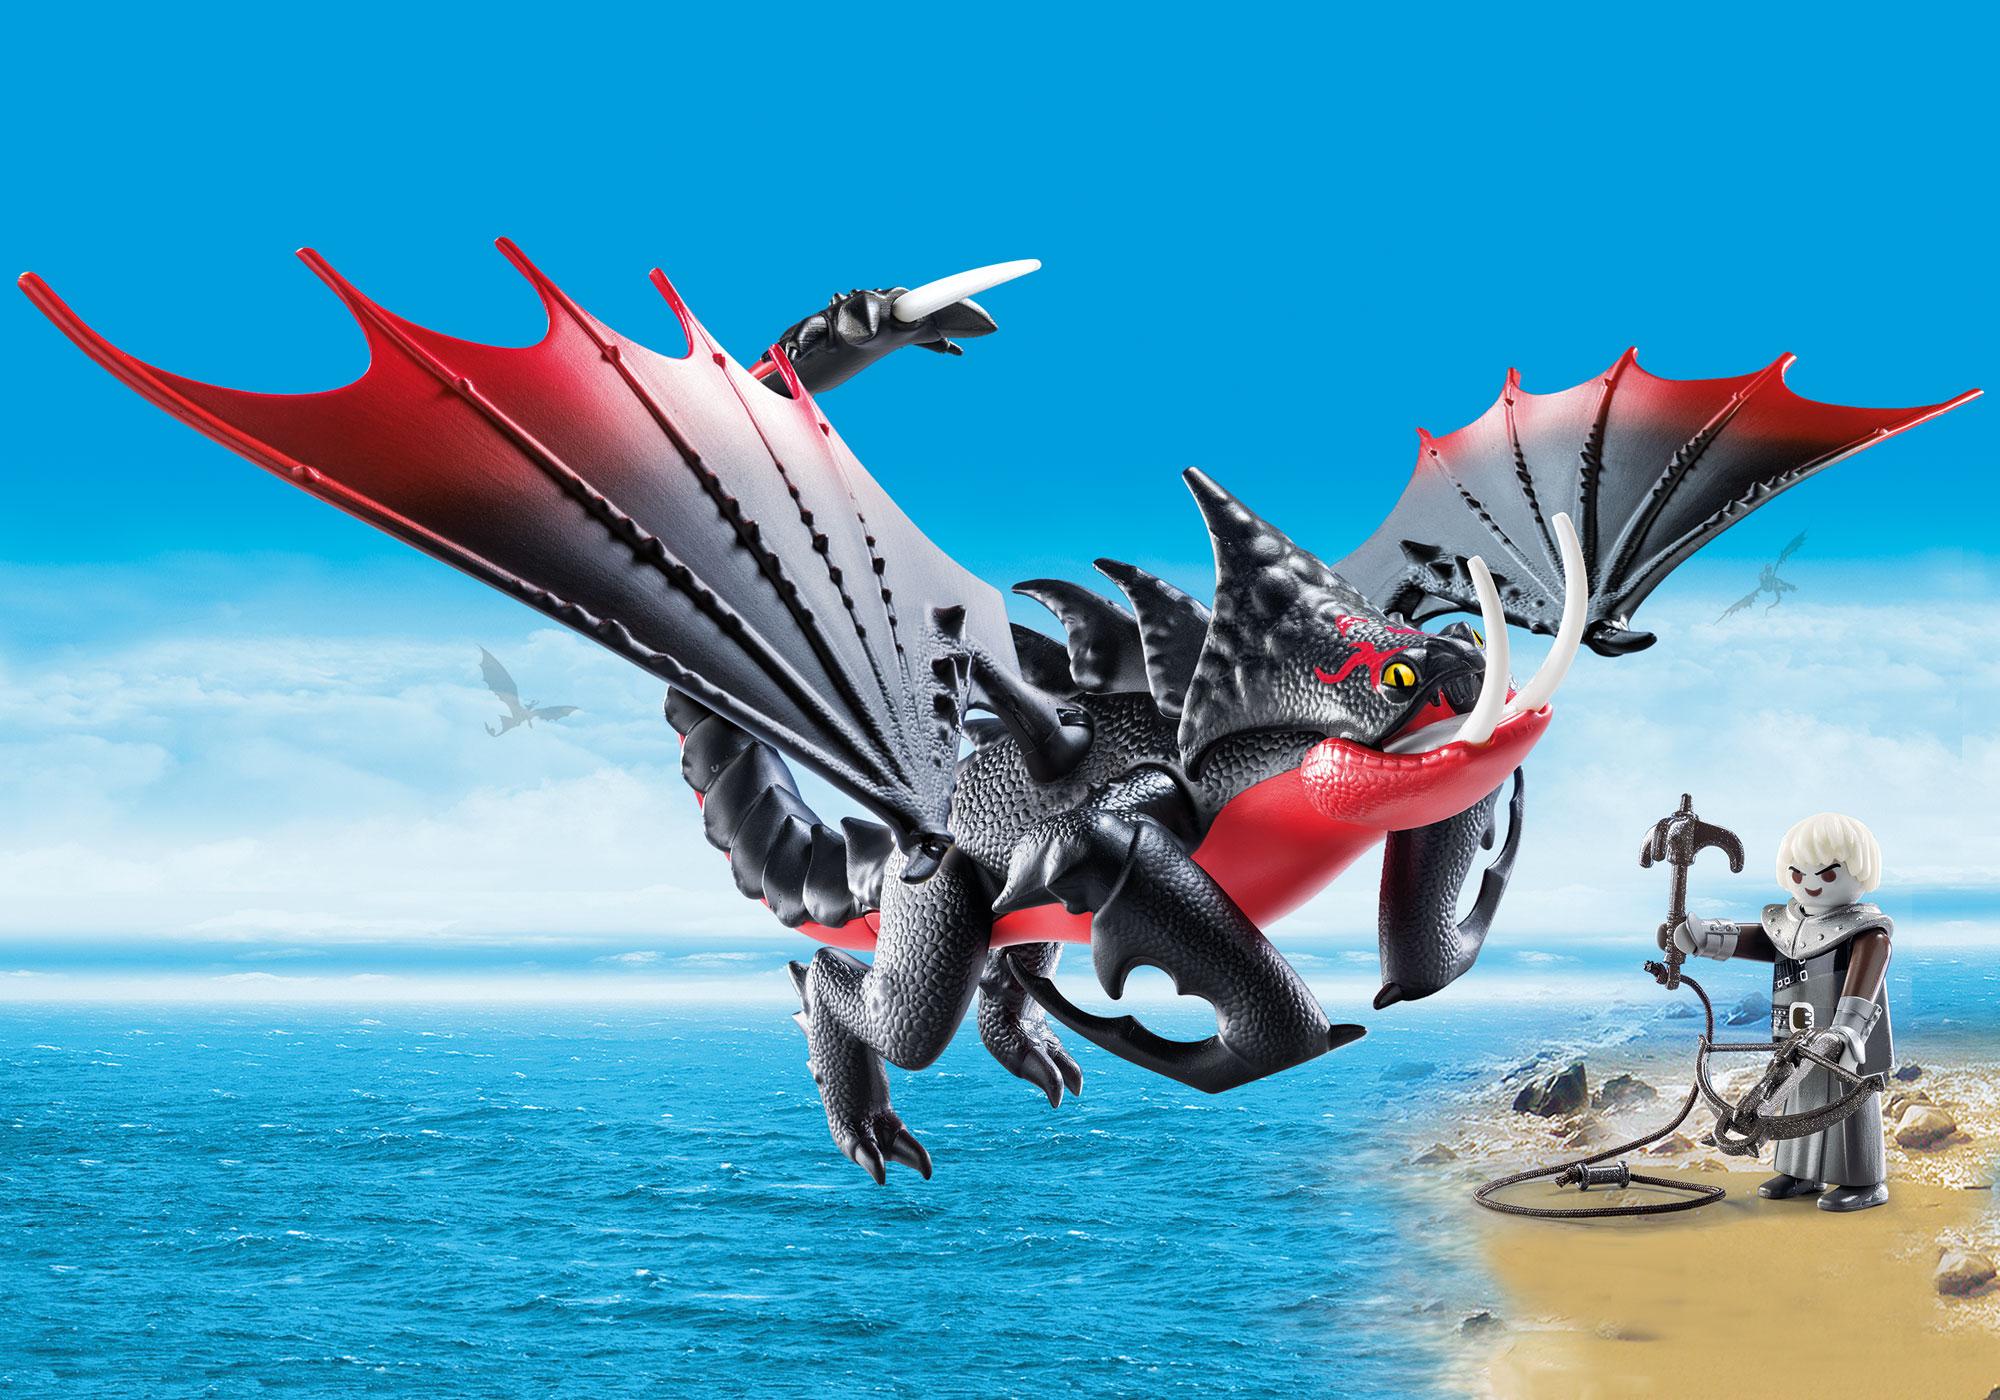 how to train your dragon 3 playmobil